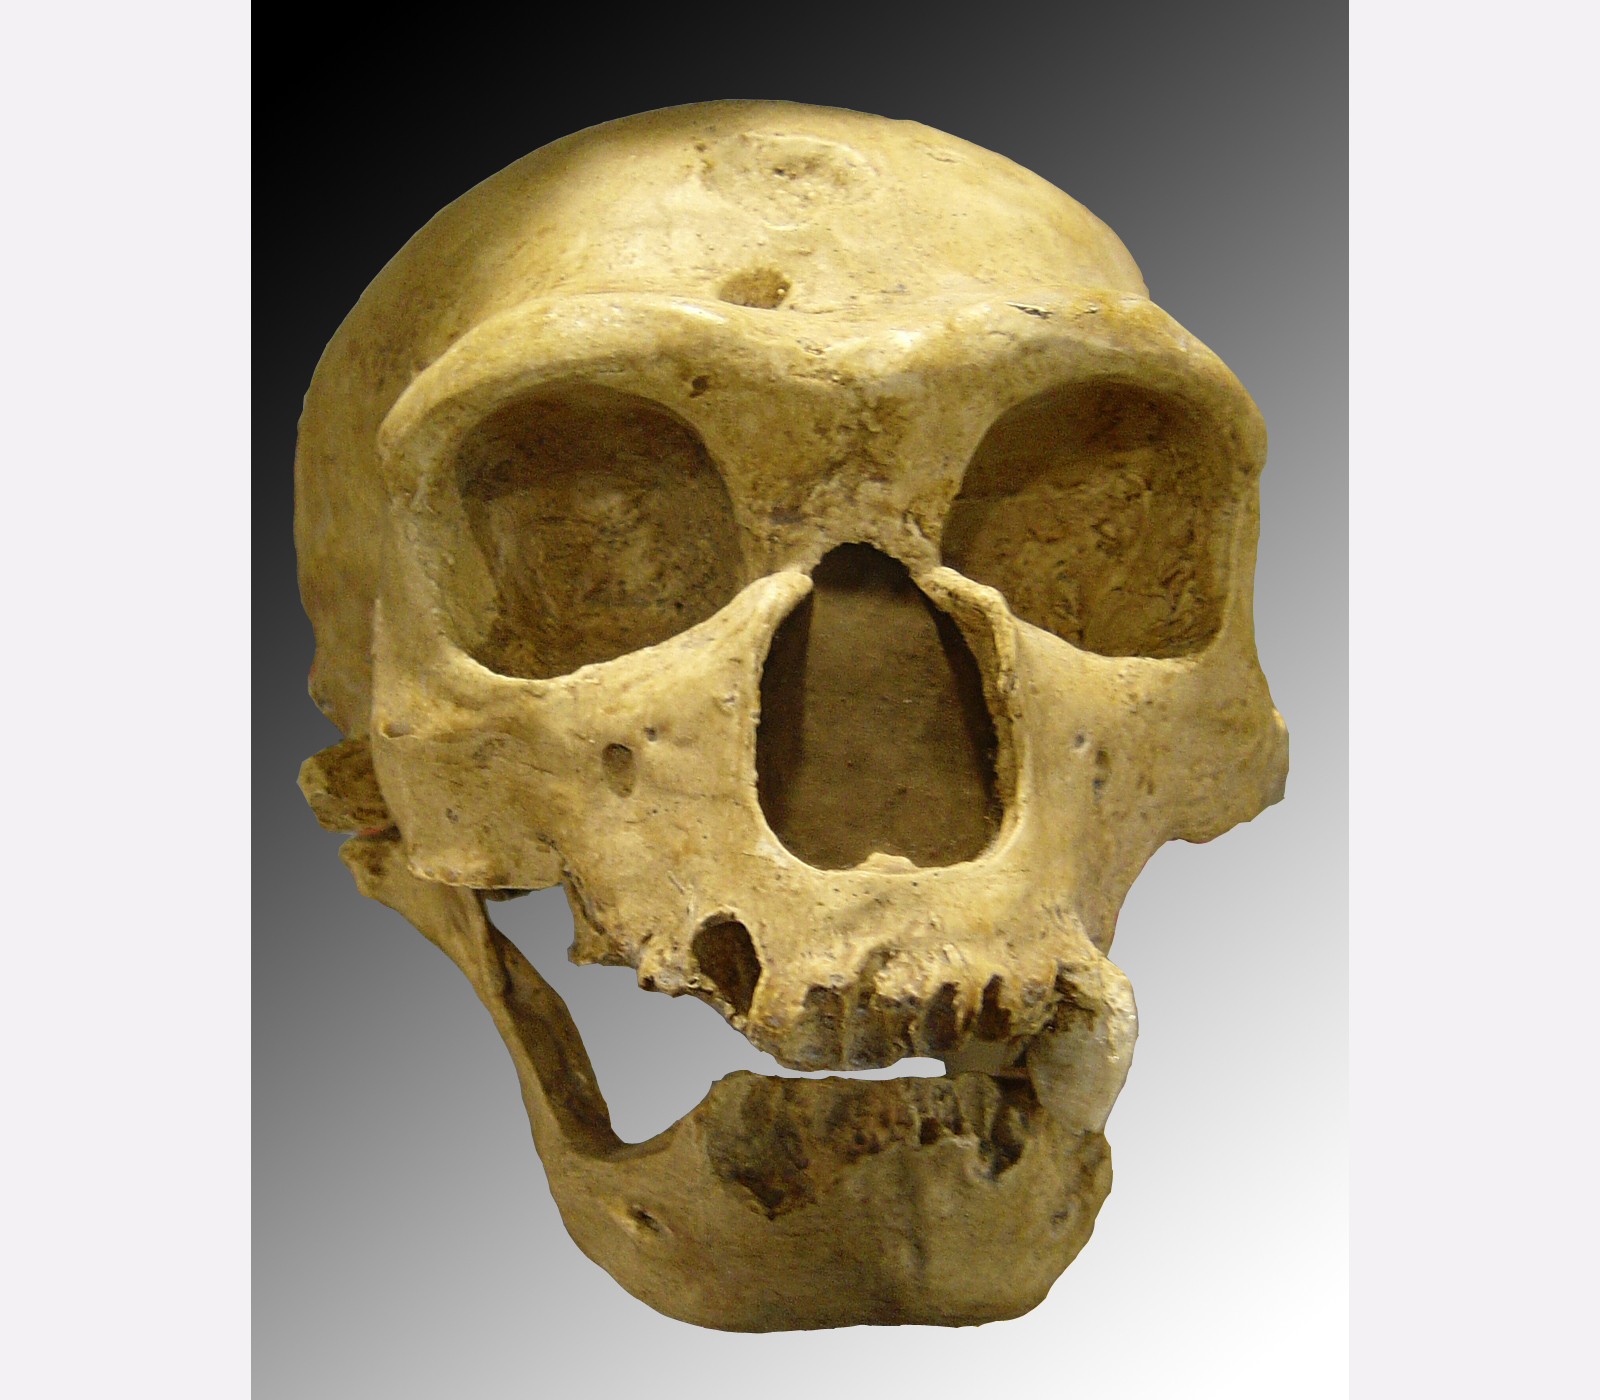 Neanderthal skull discovered in 1908 at La Chapelle-aux-Saints (France). Photo via Creative Commons